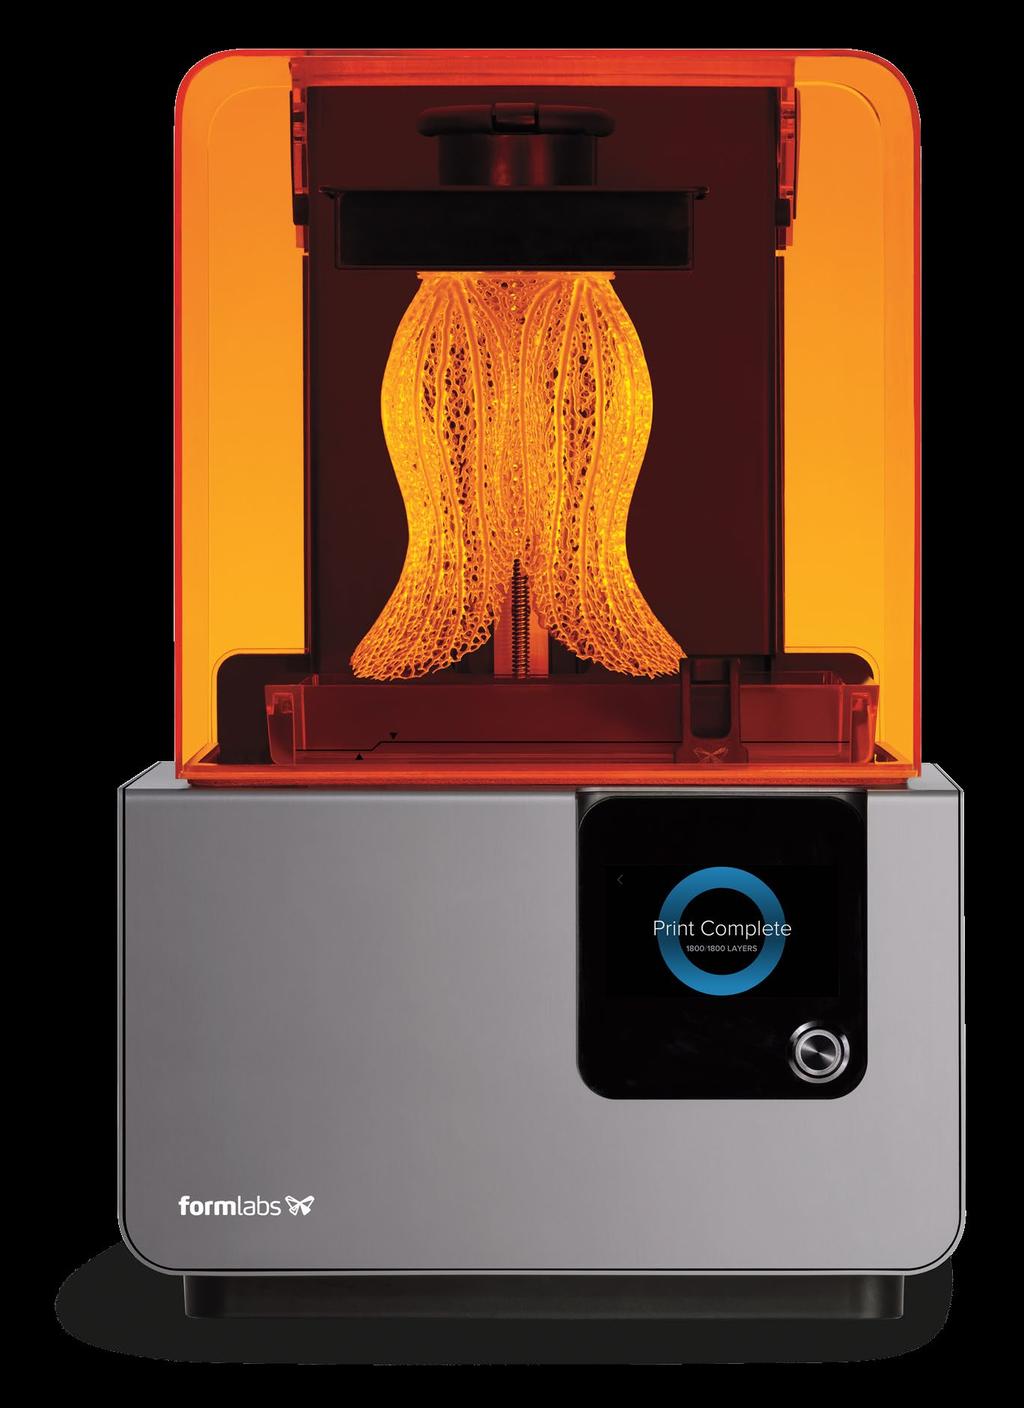 Redesigned Print Process A new peel mechanism and heated resin tank create a reliable print process.